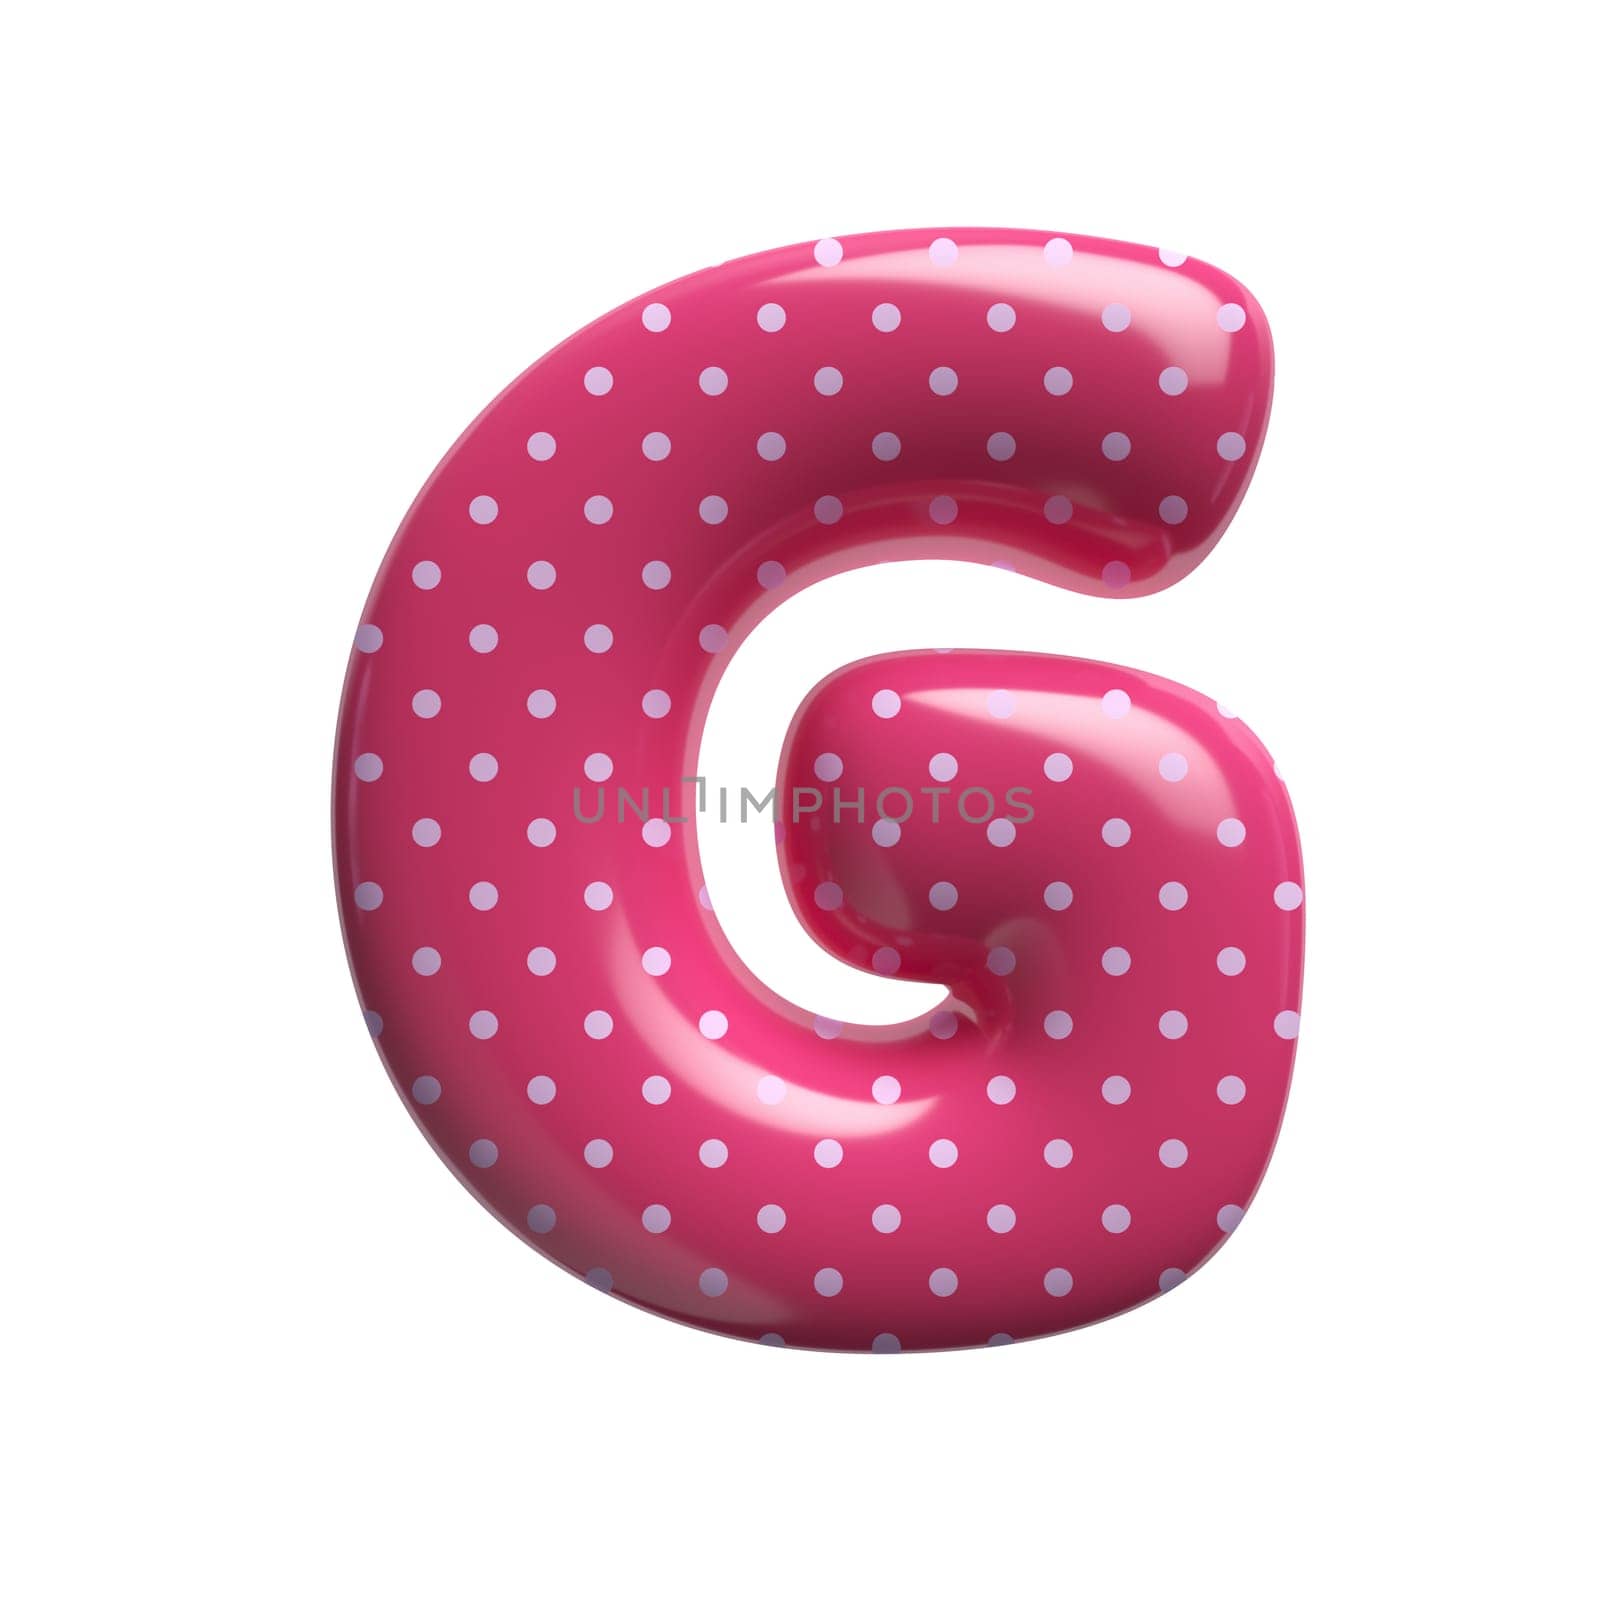 Polka dot letter G - large 3d pink retro font isolated on white background. This alphabet is perfect for creative illustrations related but not limited to Fashion, retro design, decoration...